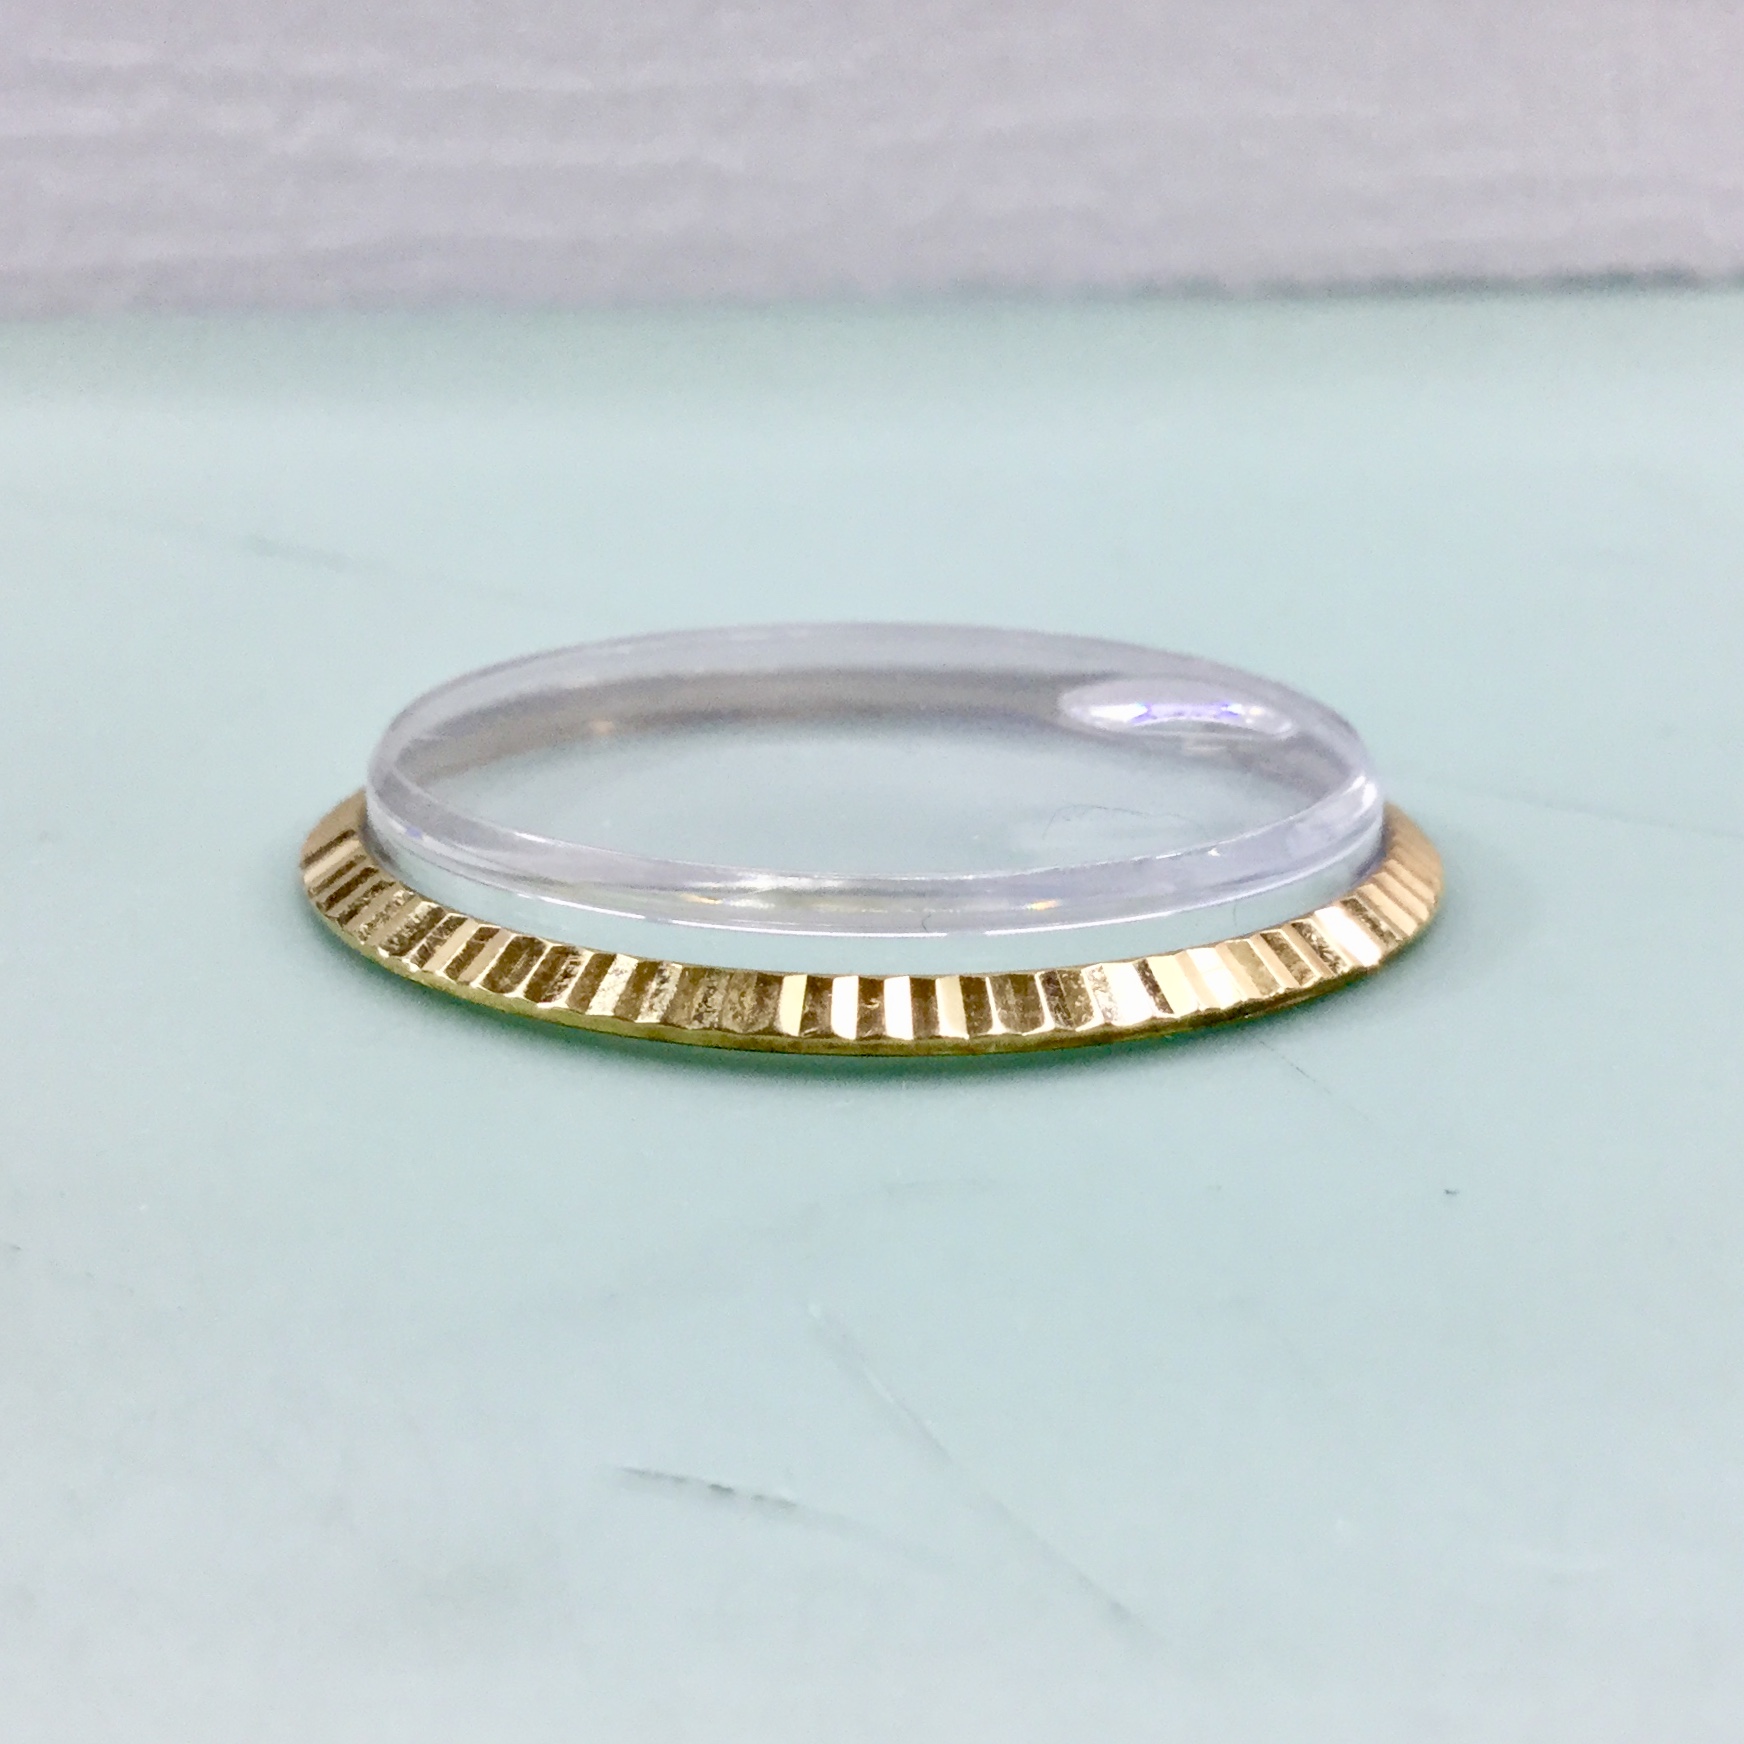 rolex datejust glass replacement